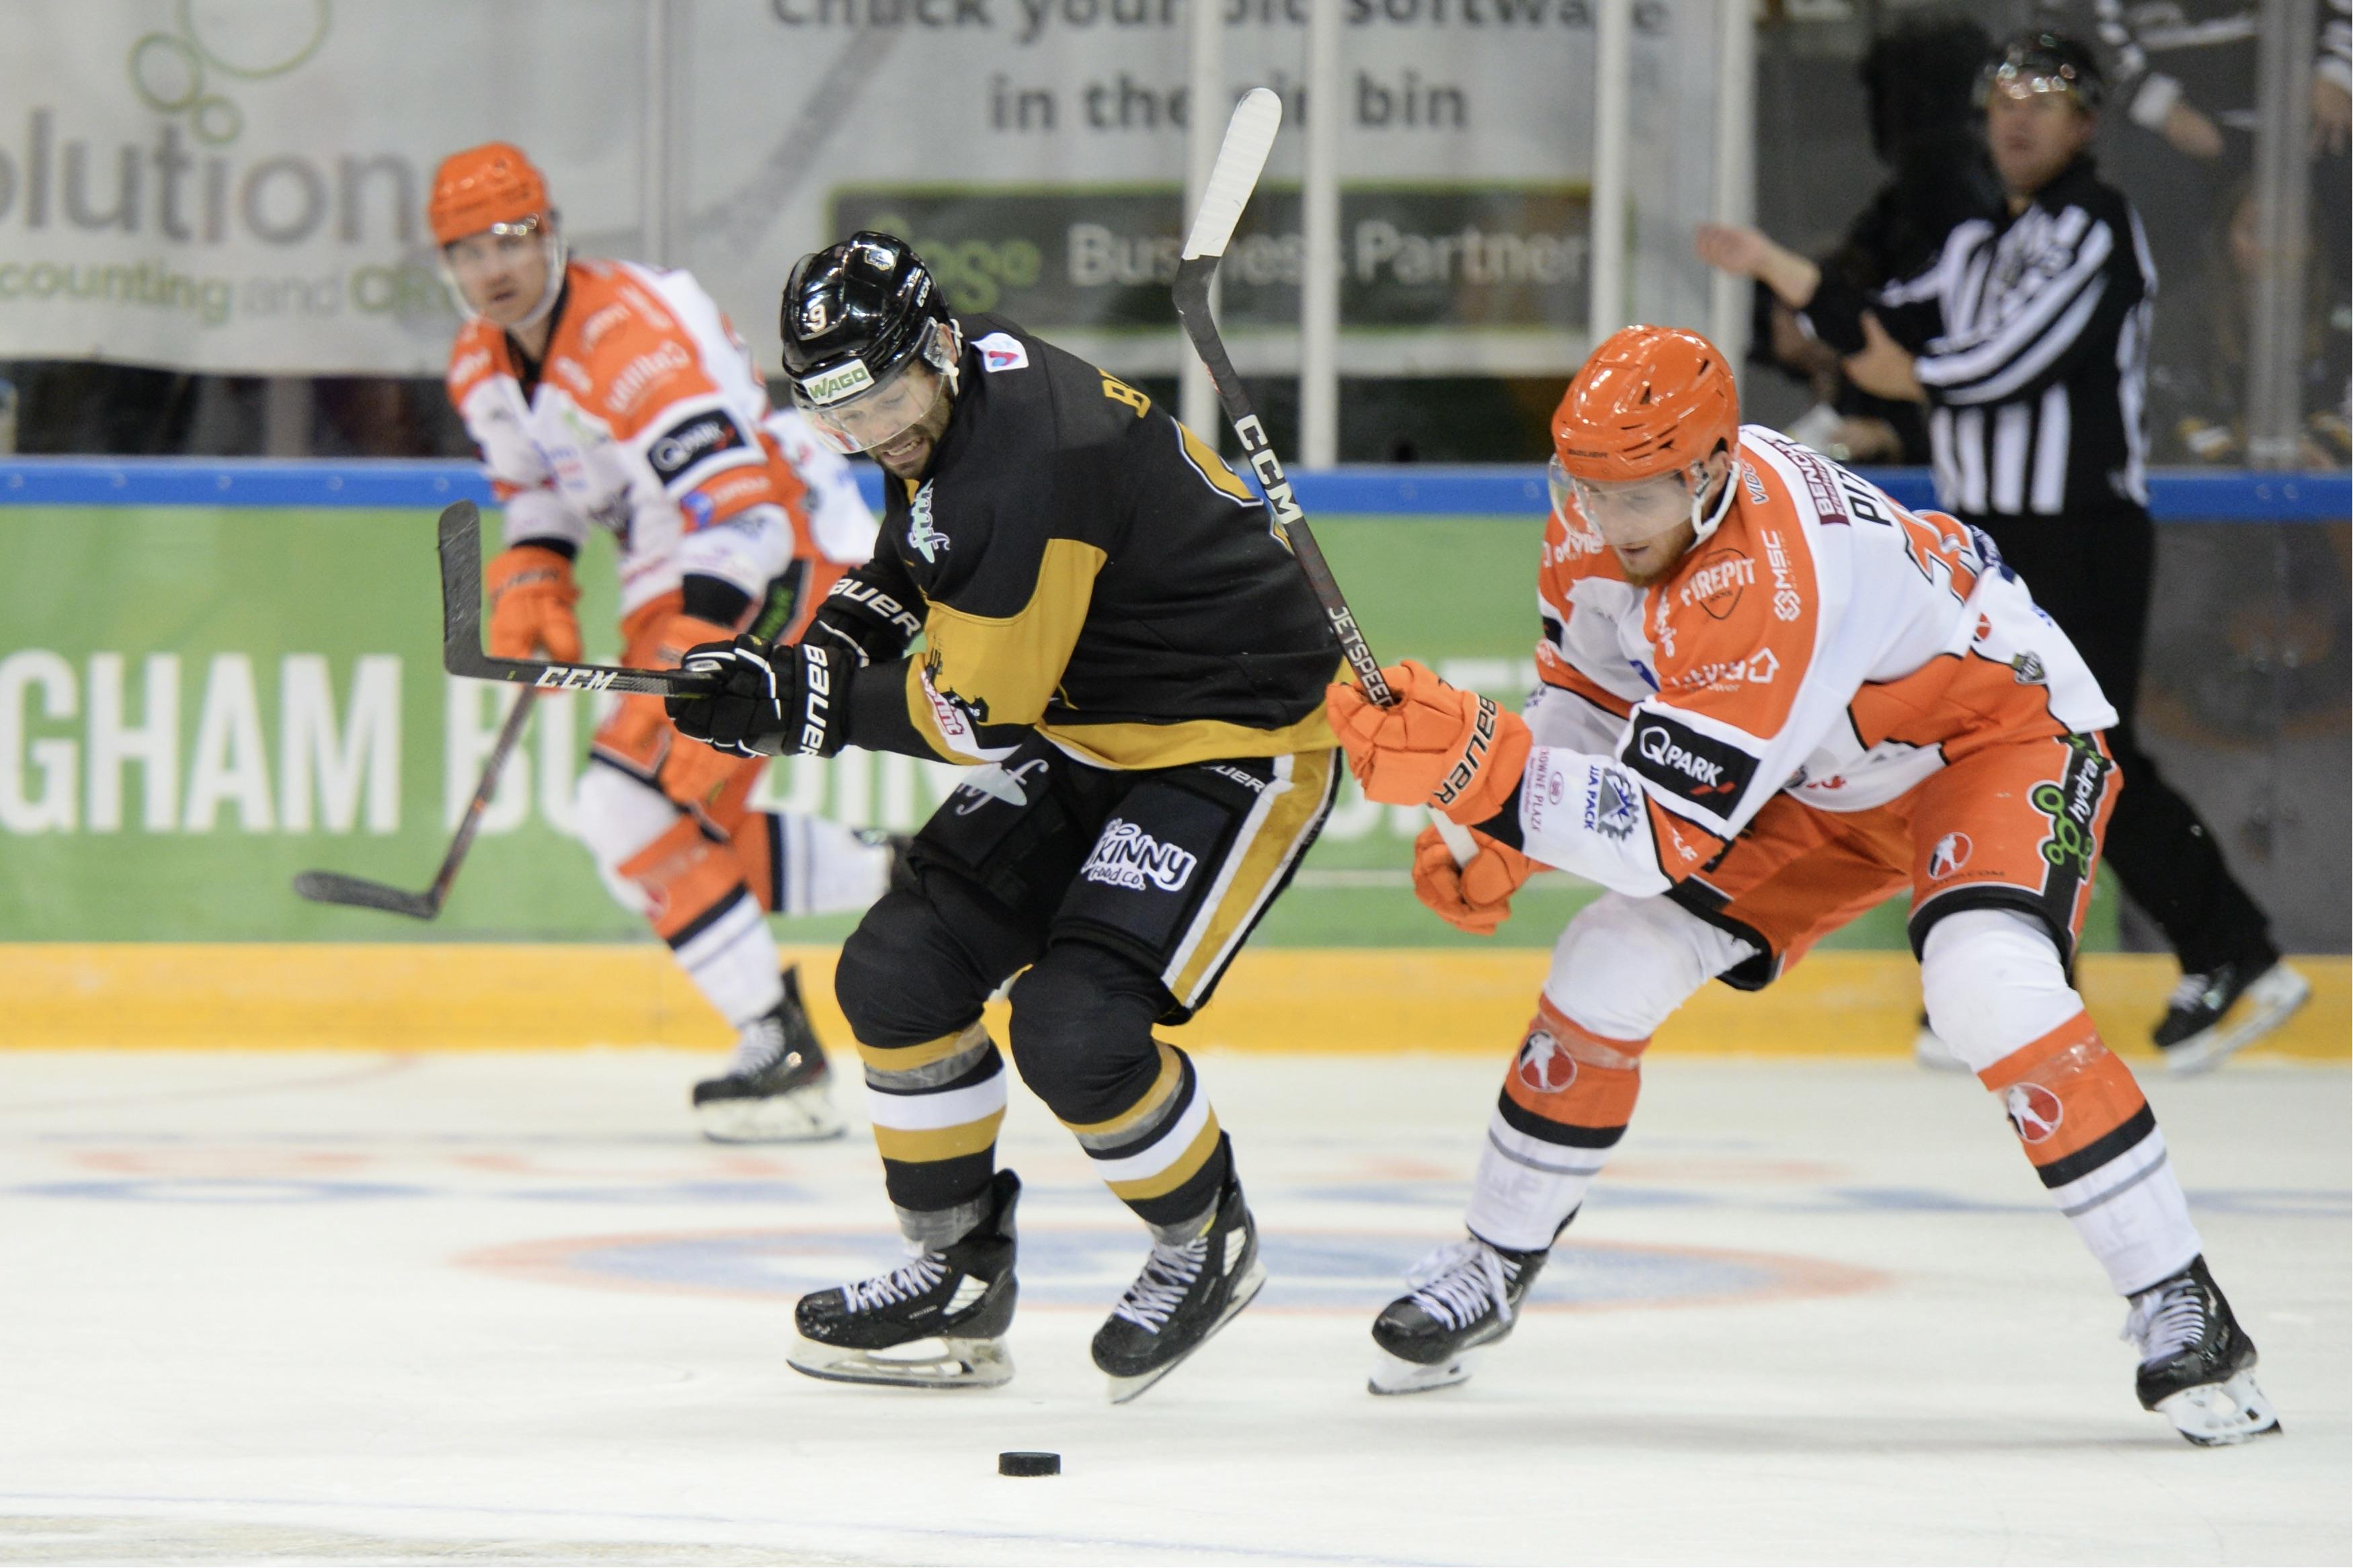 LAST DAY TO ORDER STEELERS CHALLENGE CUP TICKETS Top Image